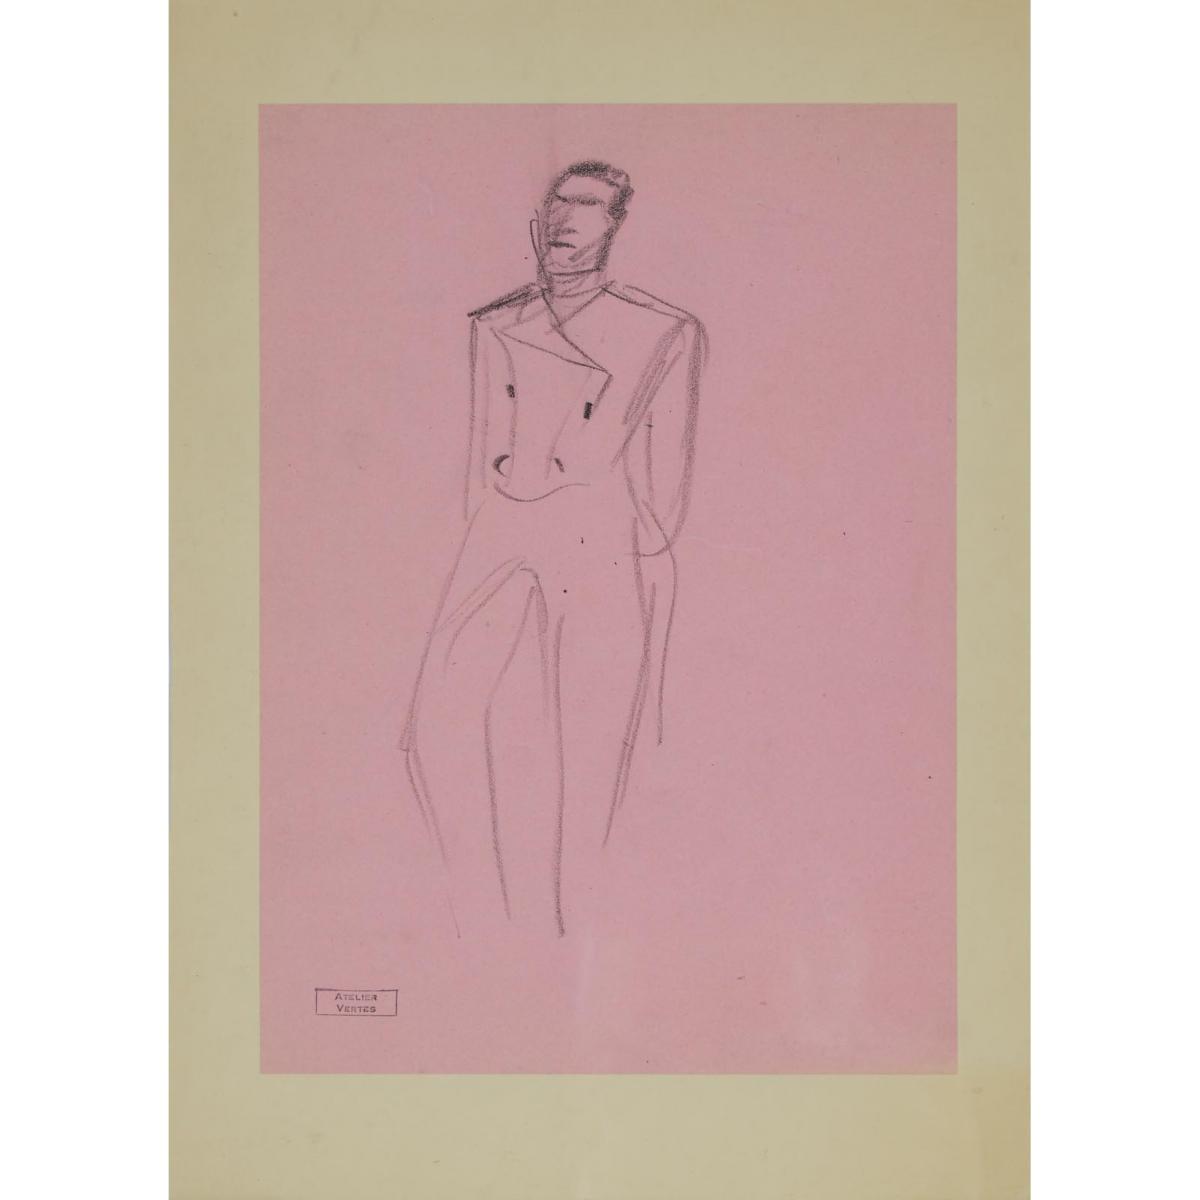 Various Artists, COLLECTION OF DRAWINGS, SOME 1956, Auguste François (Marie) Gorguet (1862-1927), Fr - Image 14 of 17